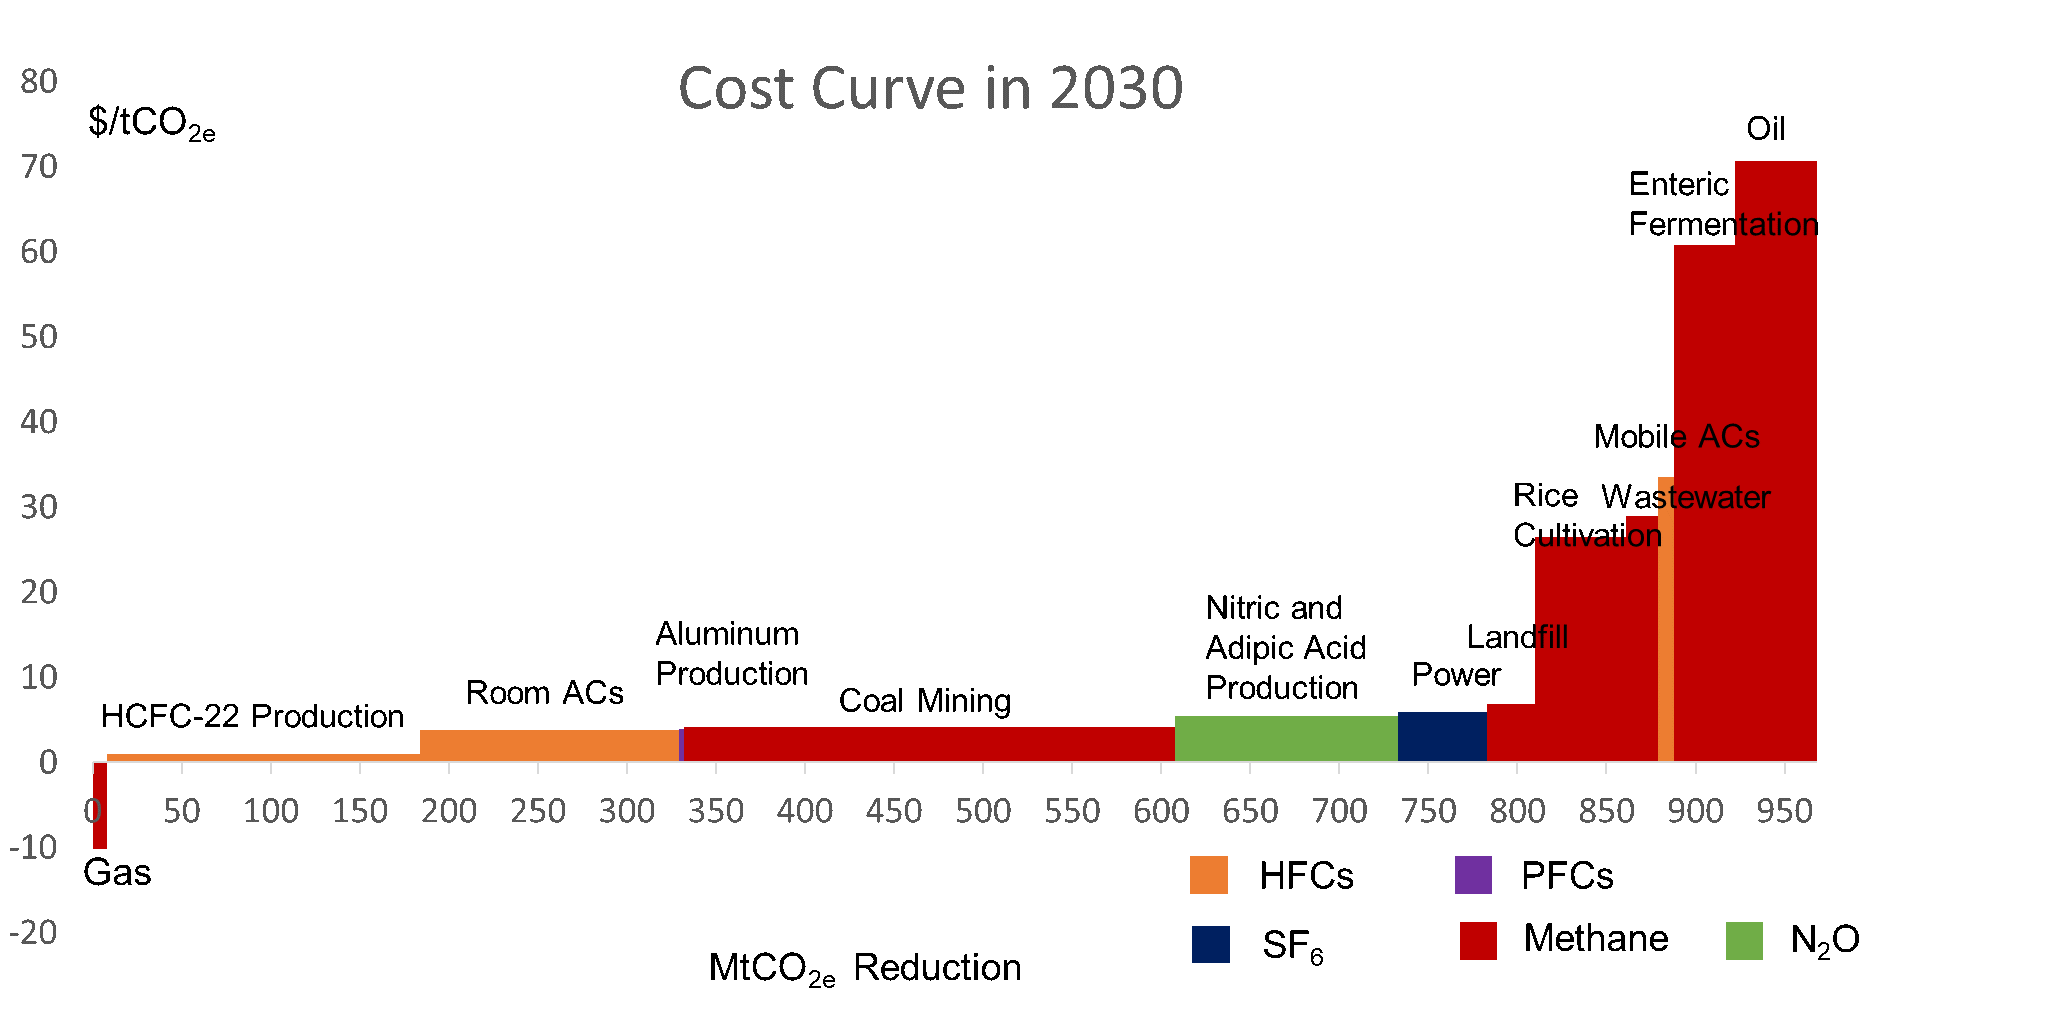 China Non-CO2 Mitigation Cost-curve  Source: Lin et al. 2021. “Opportunities to Tackle Short-lived Climate Pollutants and Other Greenhouse Gases for China.”  